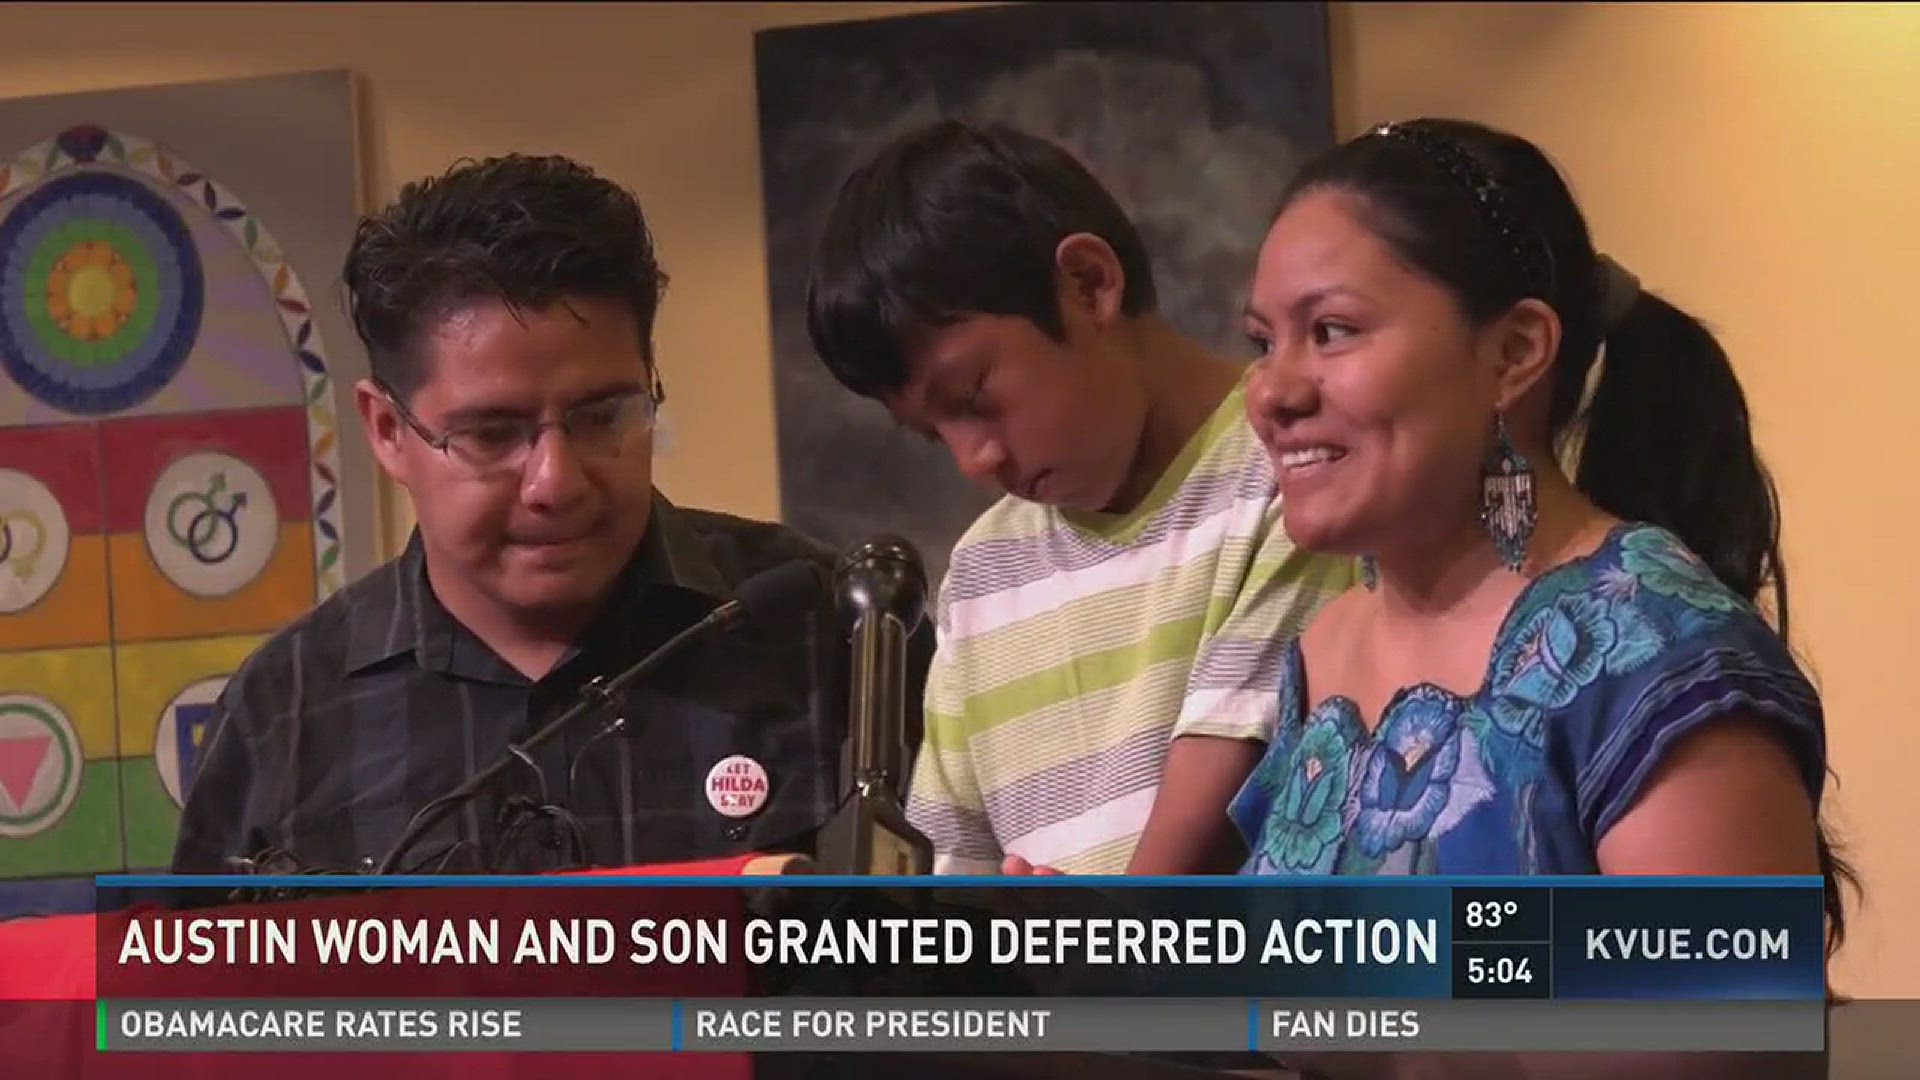 Austin woman and son granted deferred action